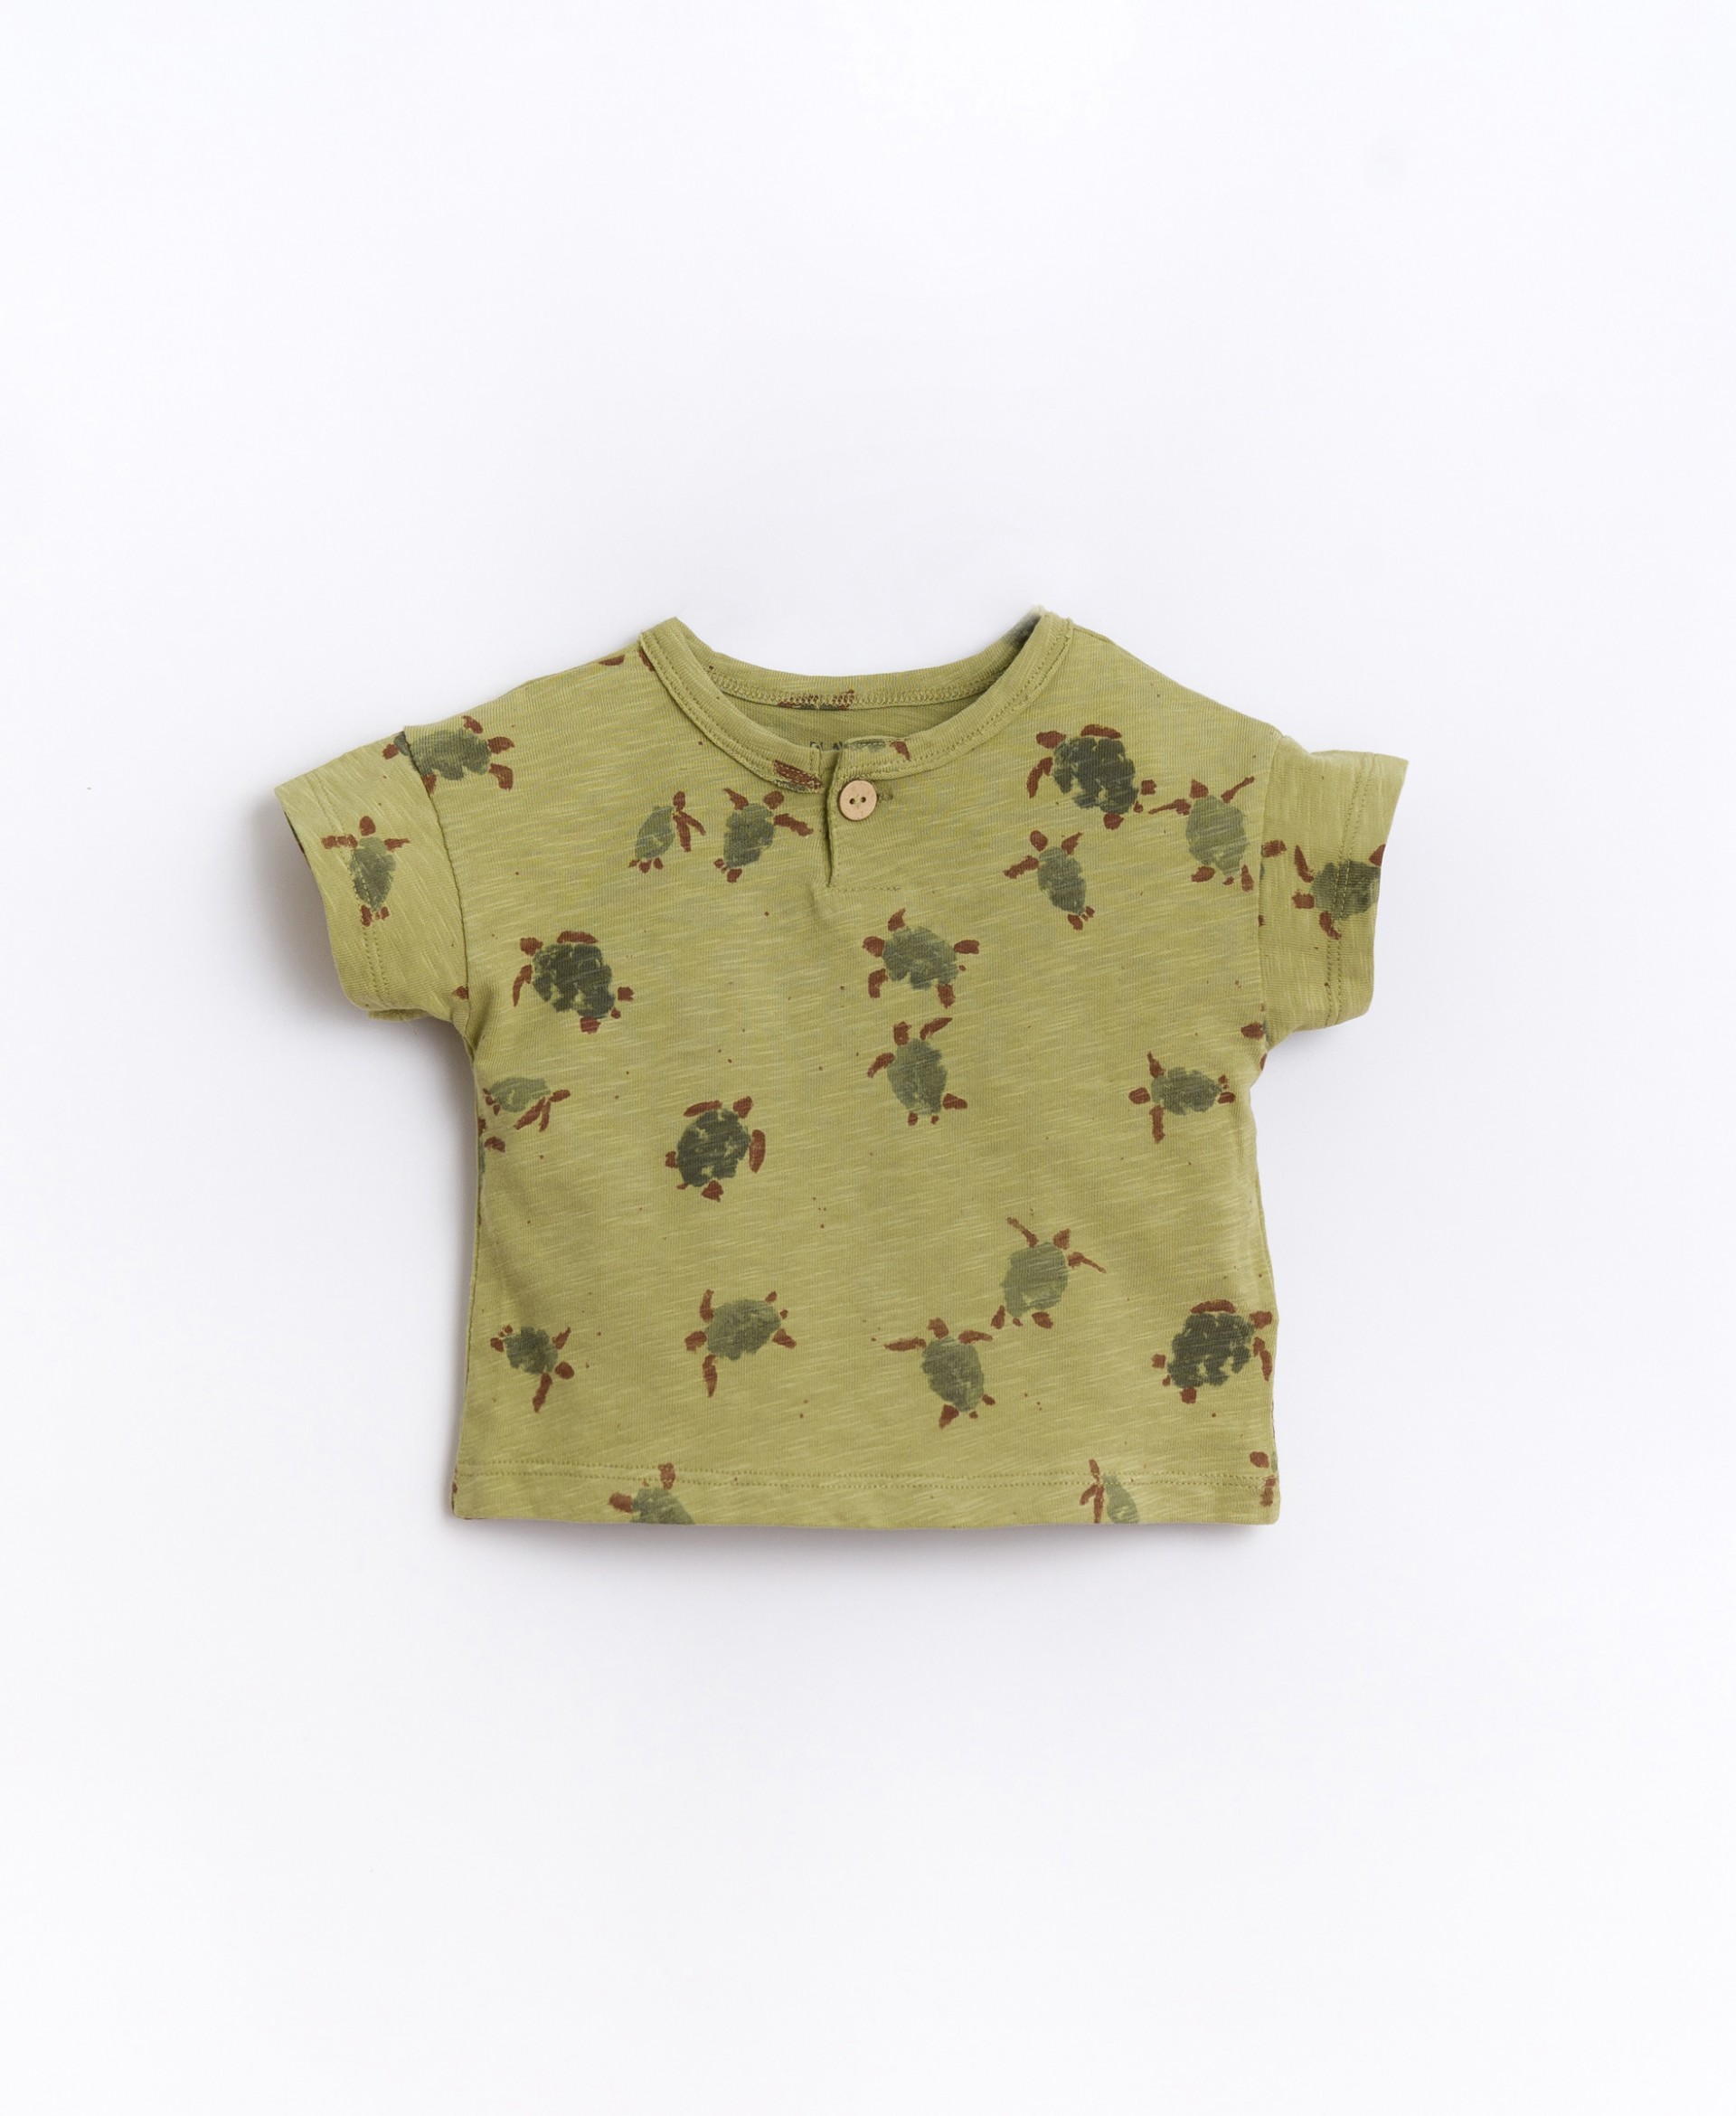 T-shirt in turtle print |Basketry